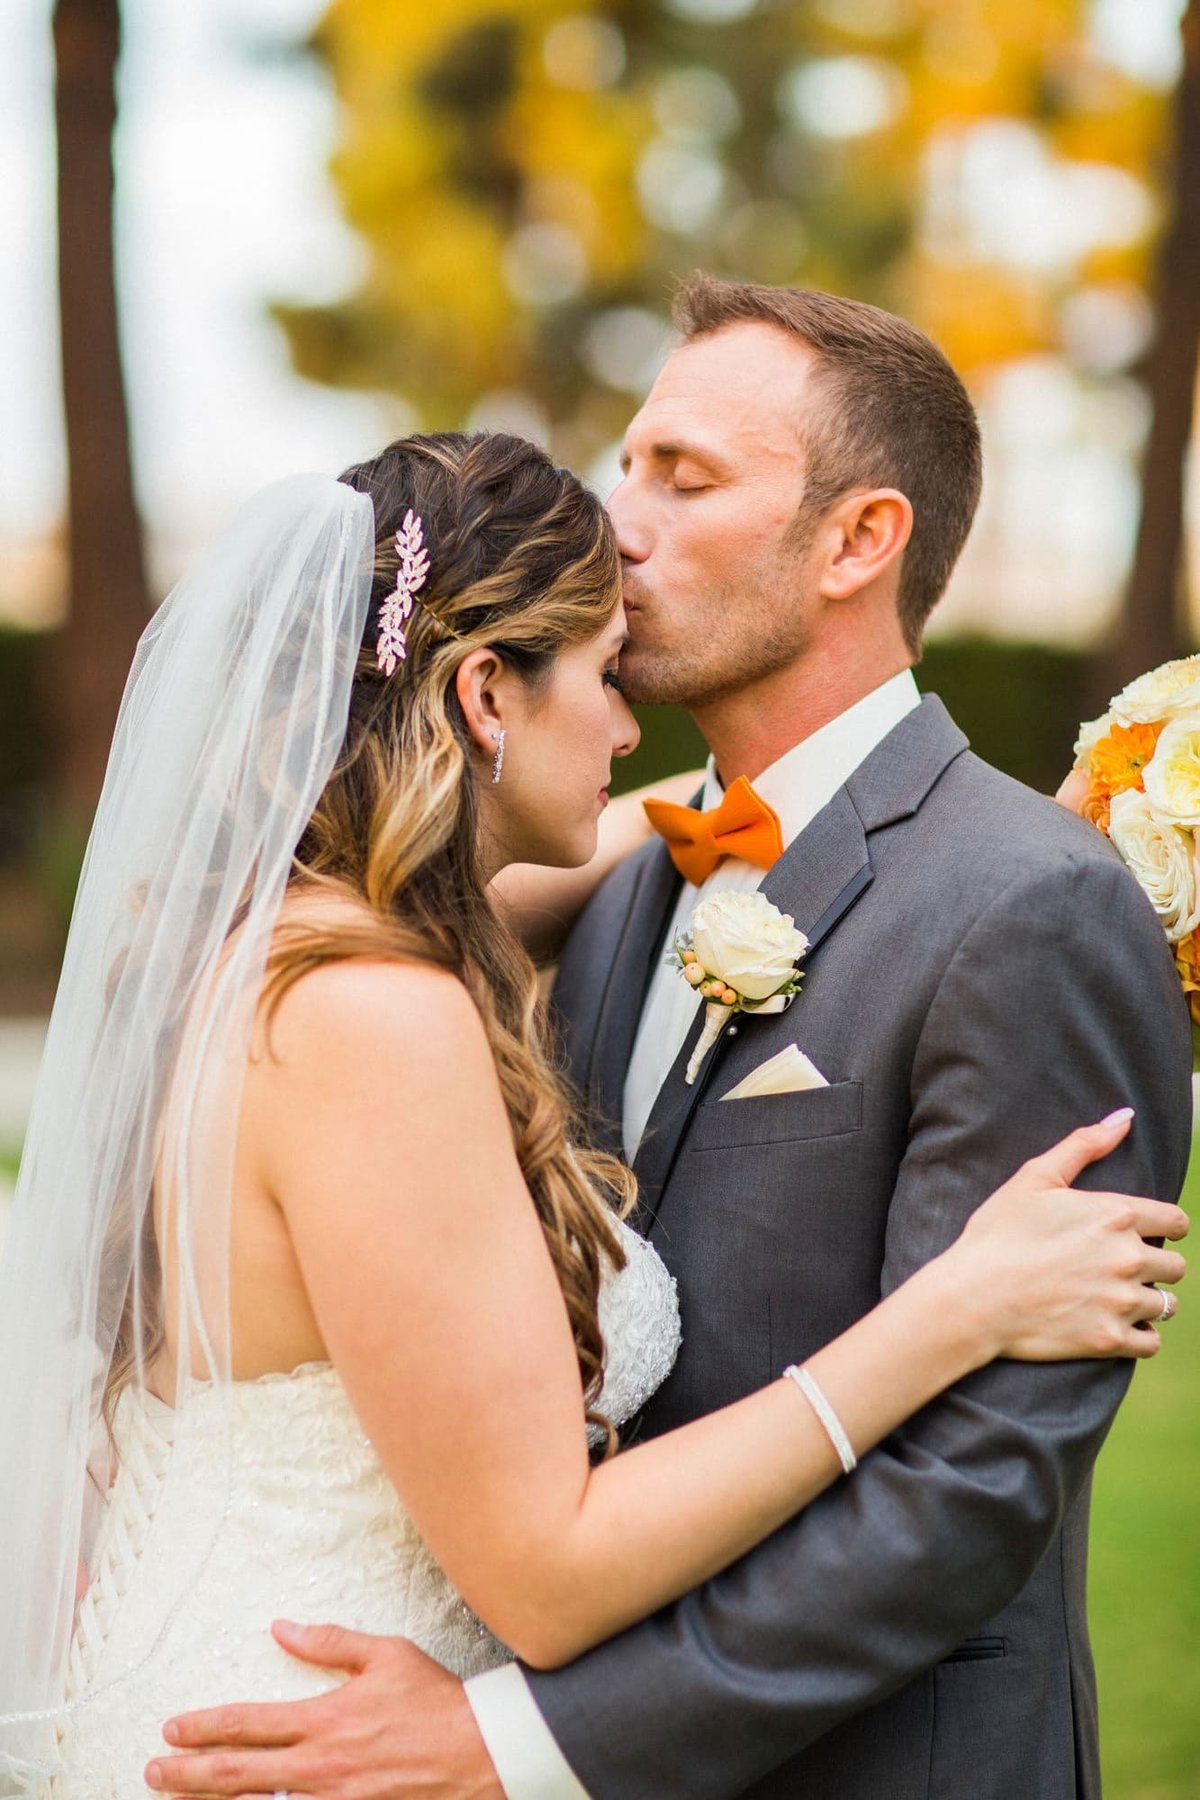 Tender moment as Groom kisses his Bride's forehead while embracing each other